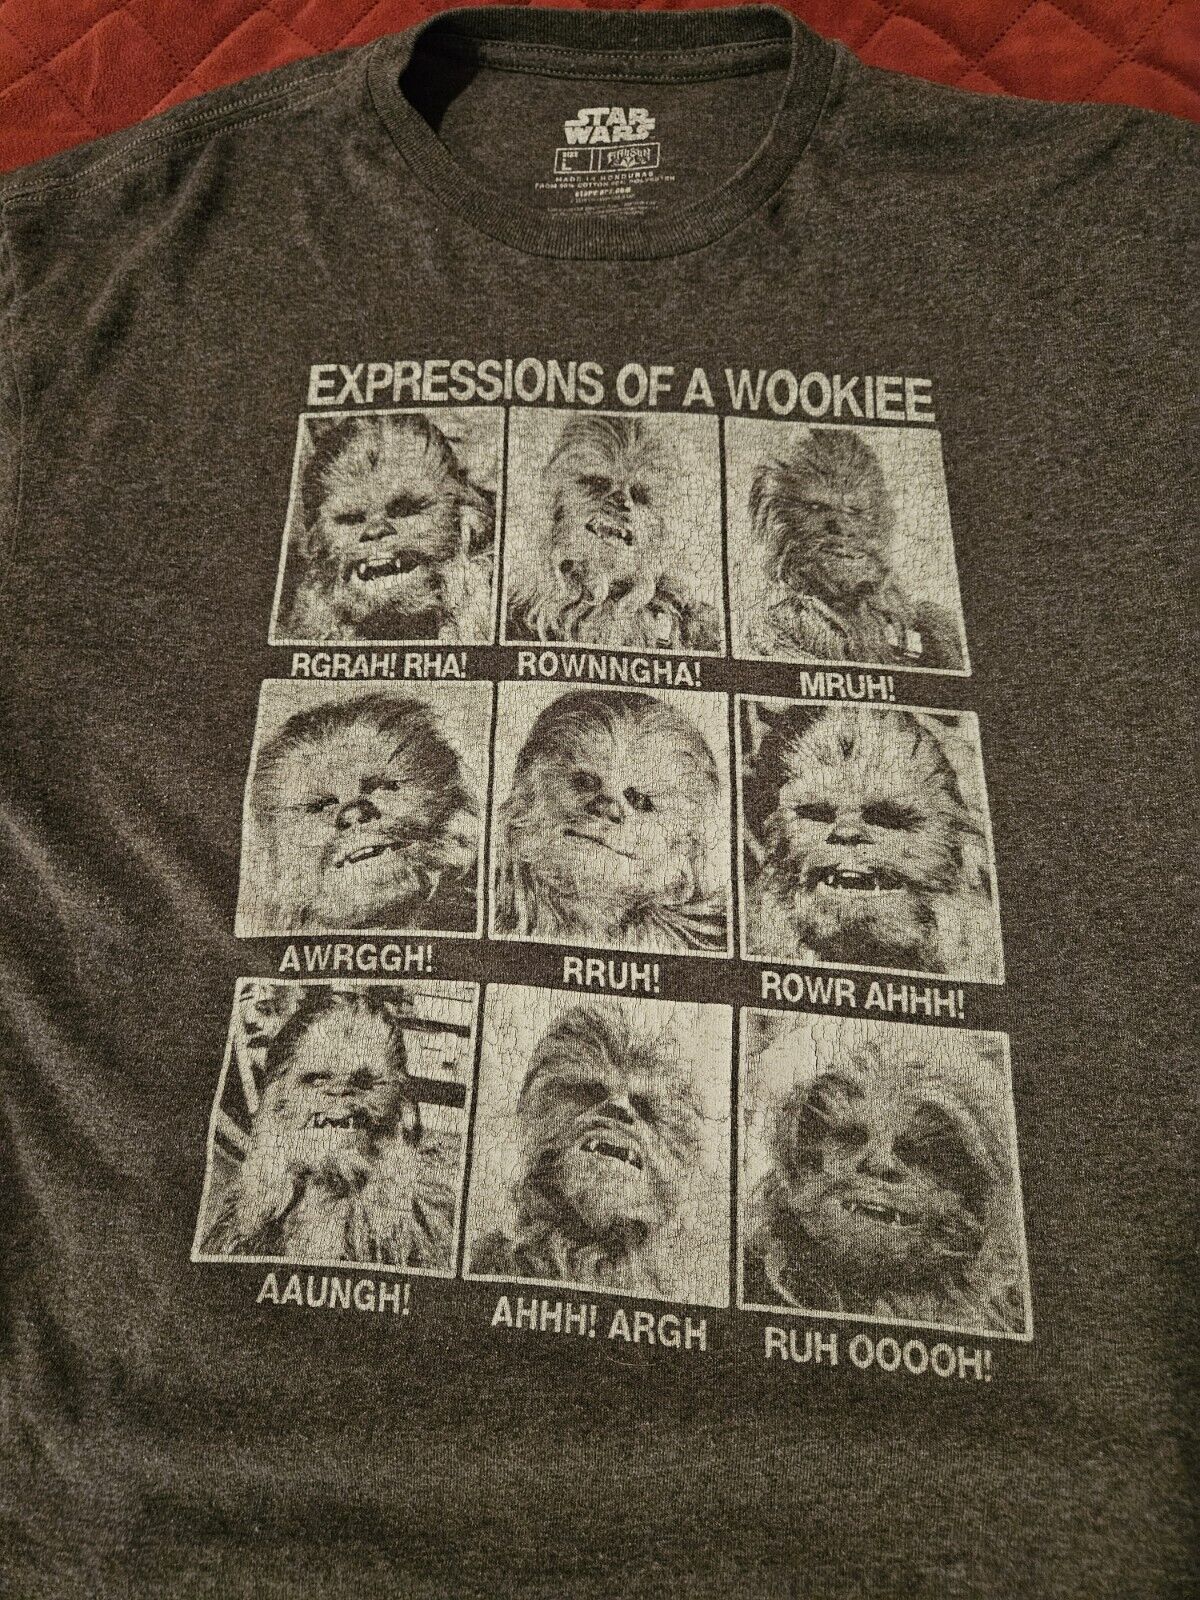 STAR WARS CHEWBACCA “ EXPRESSIONS OF A WOOKIE “ SHIRT / LARGE